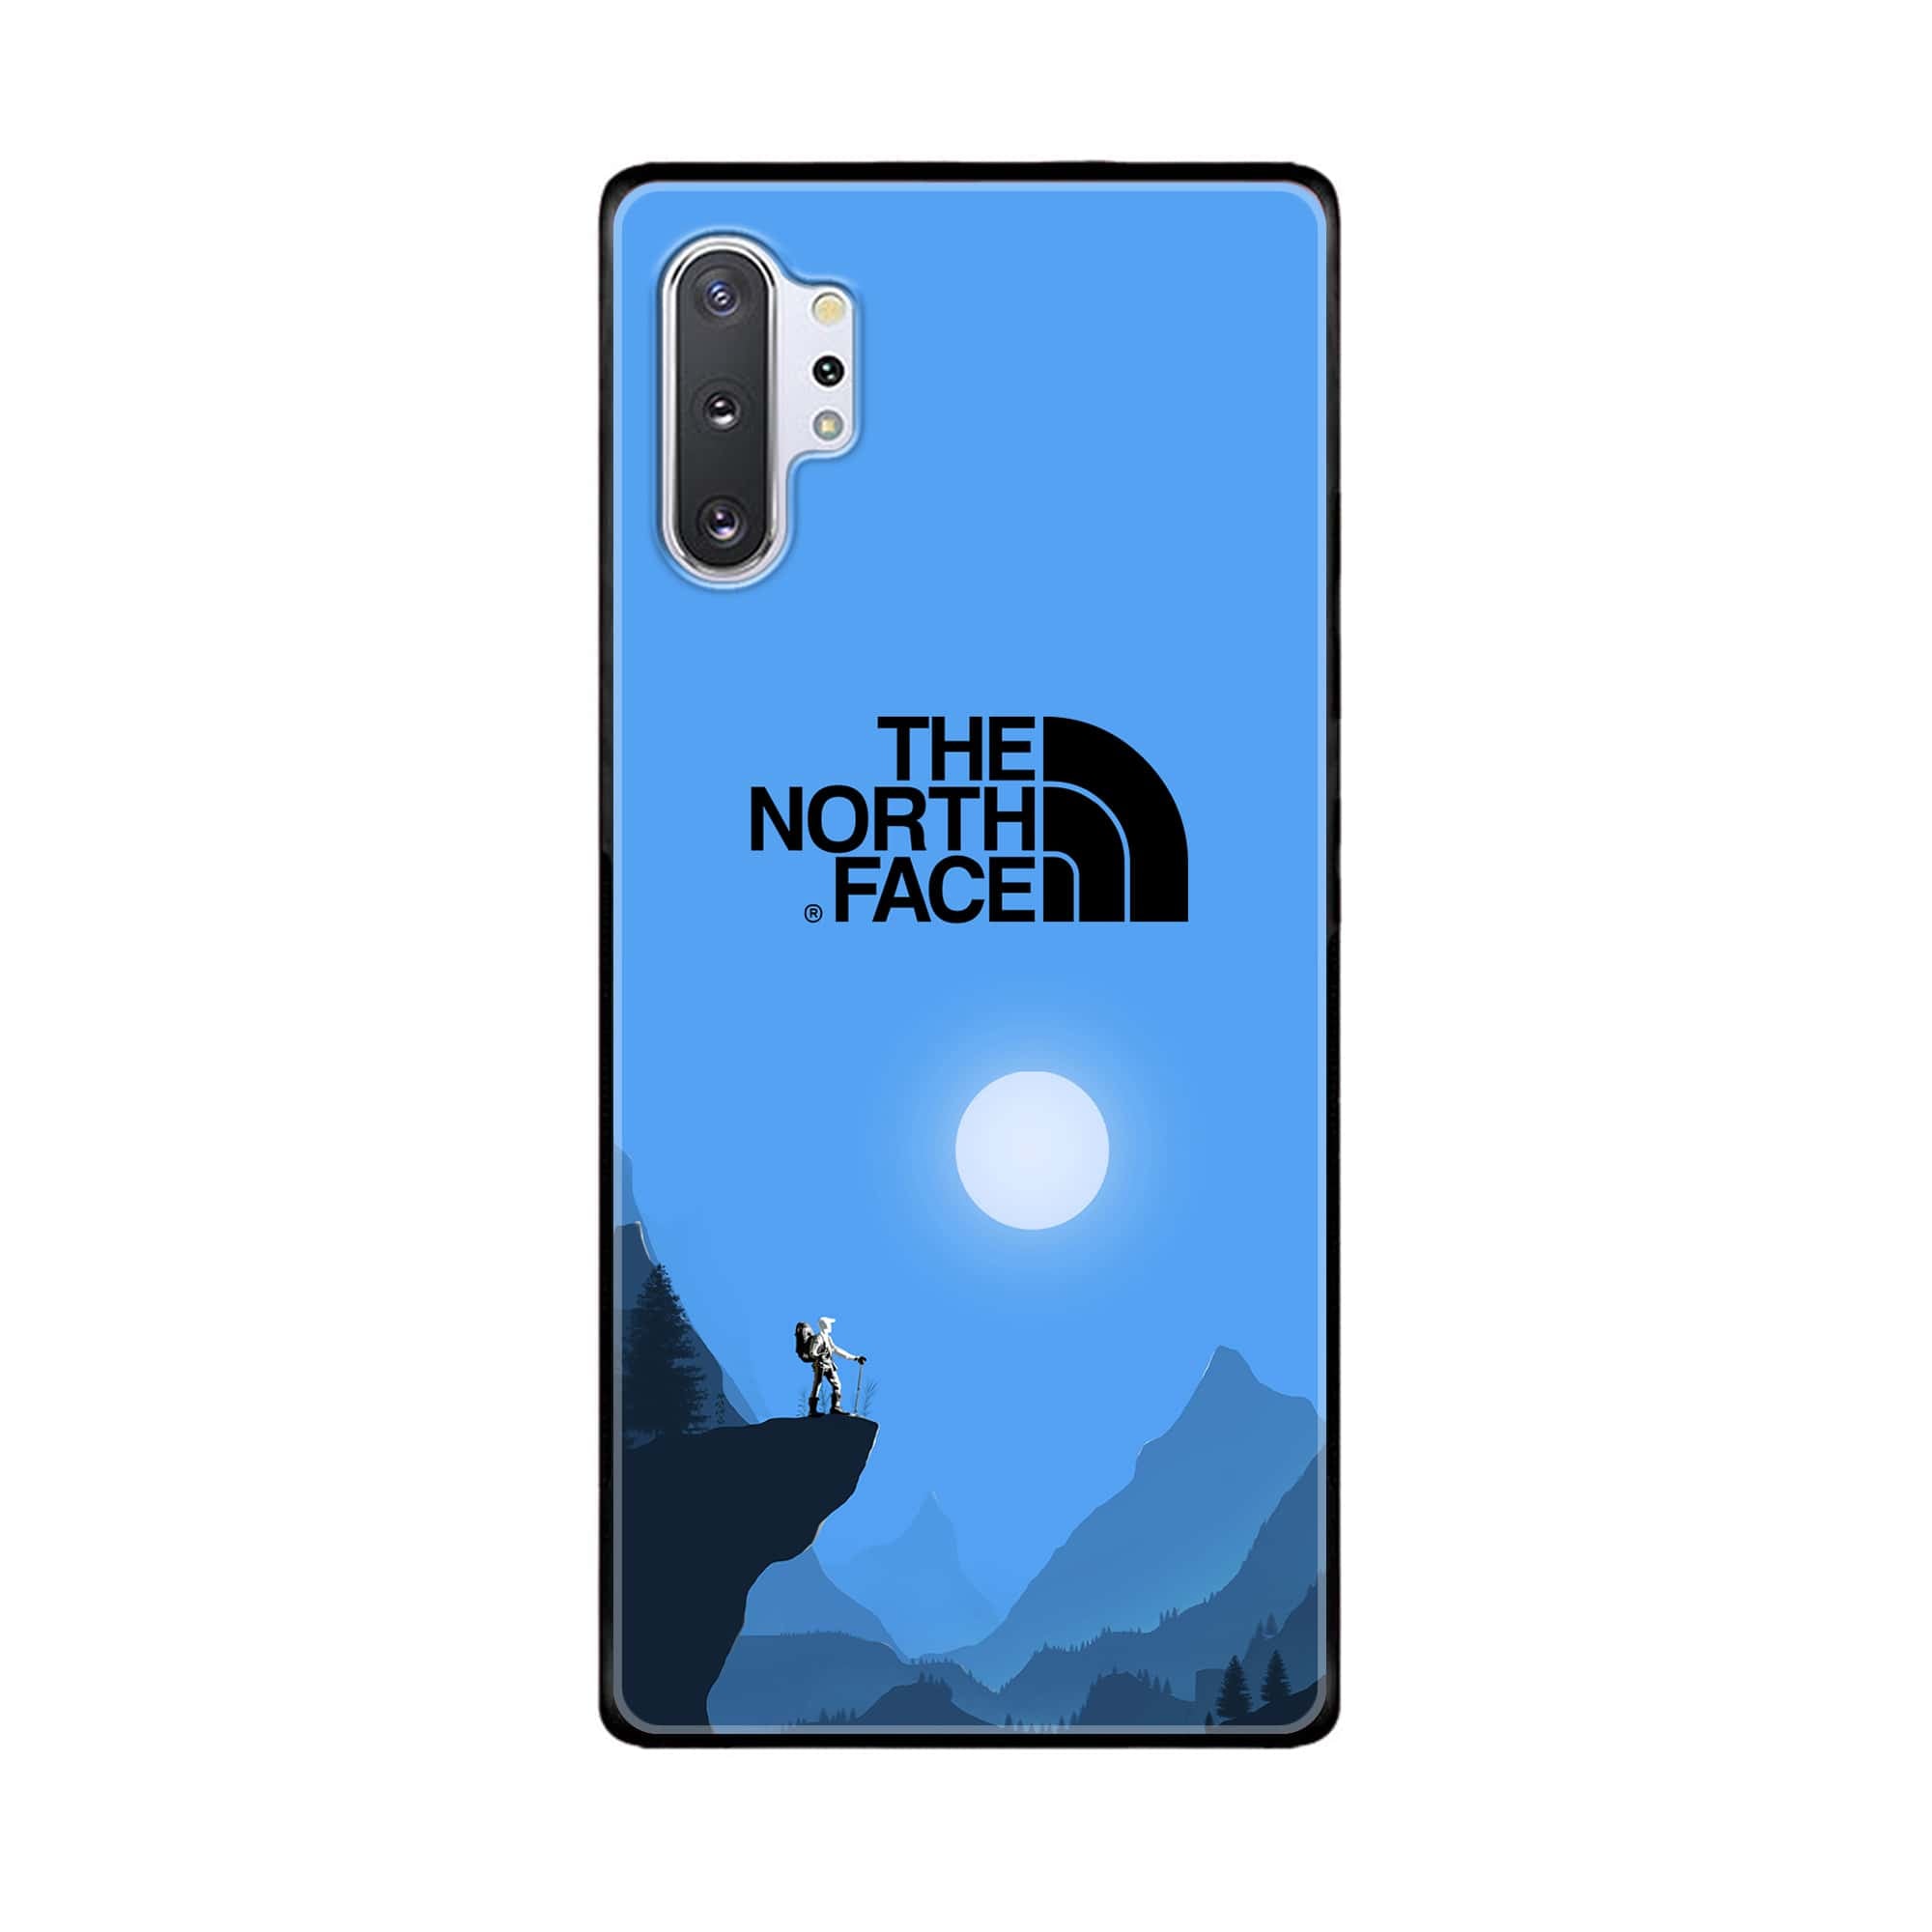 Galaxy Note 10 Pro/Plus - The North Face Series - Premium Printed Glass soft Bumper shock Proof Case